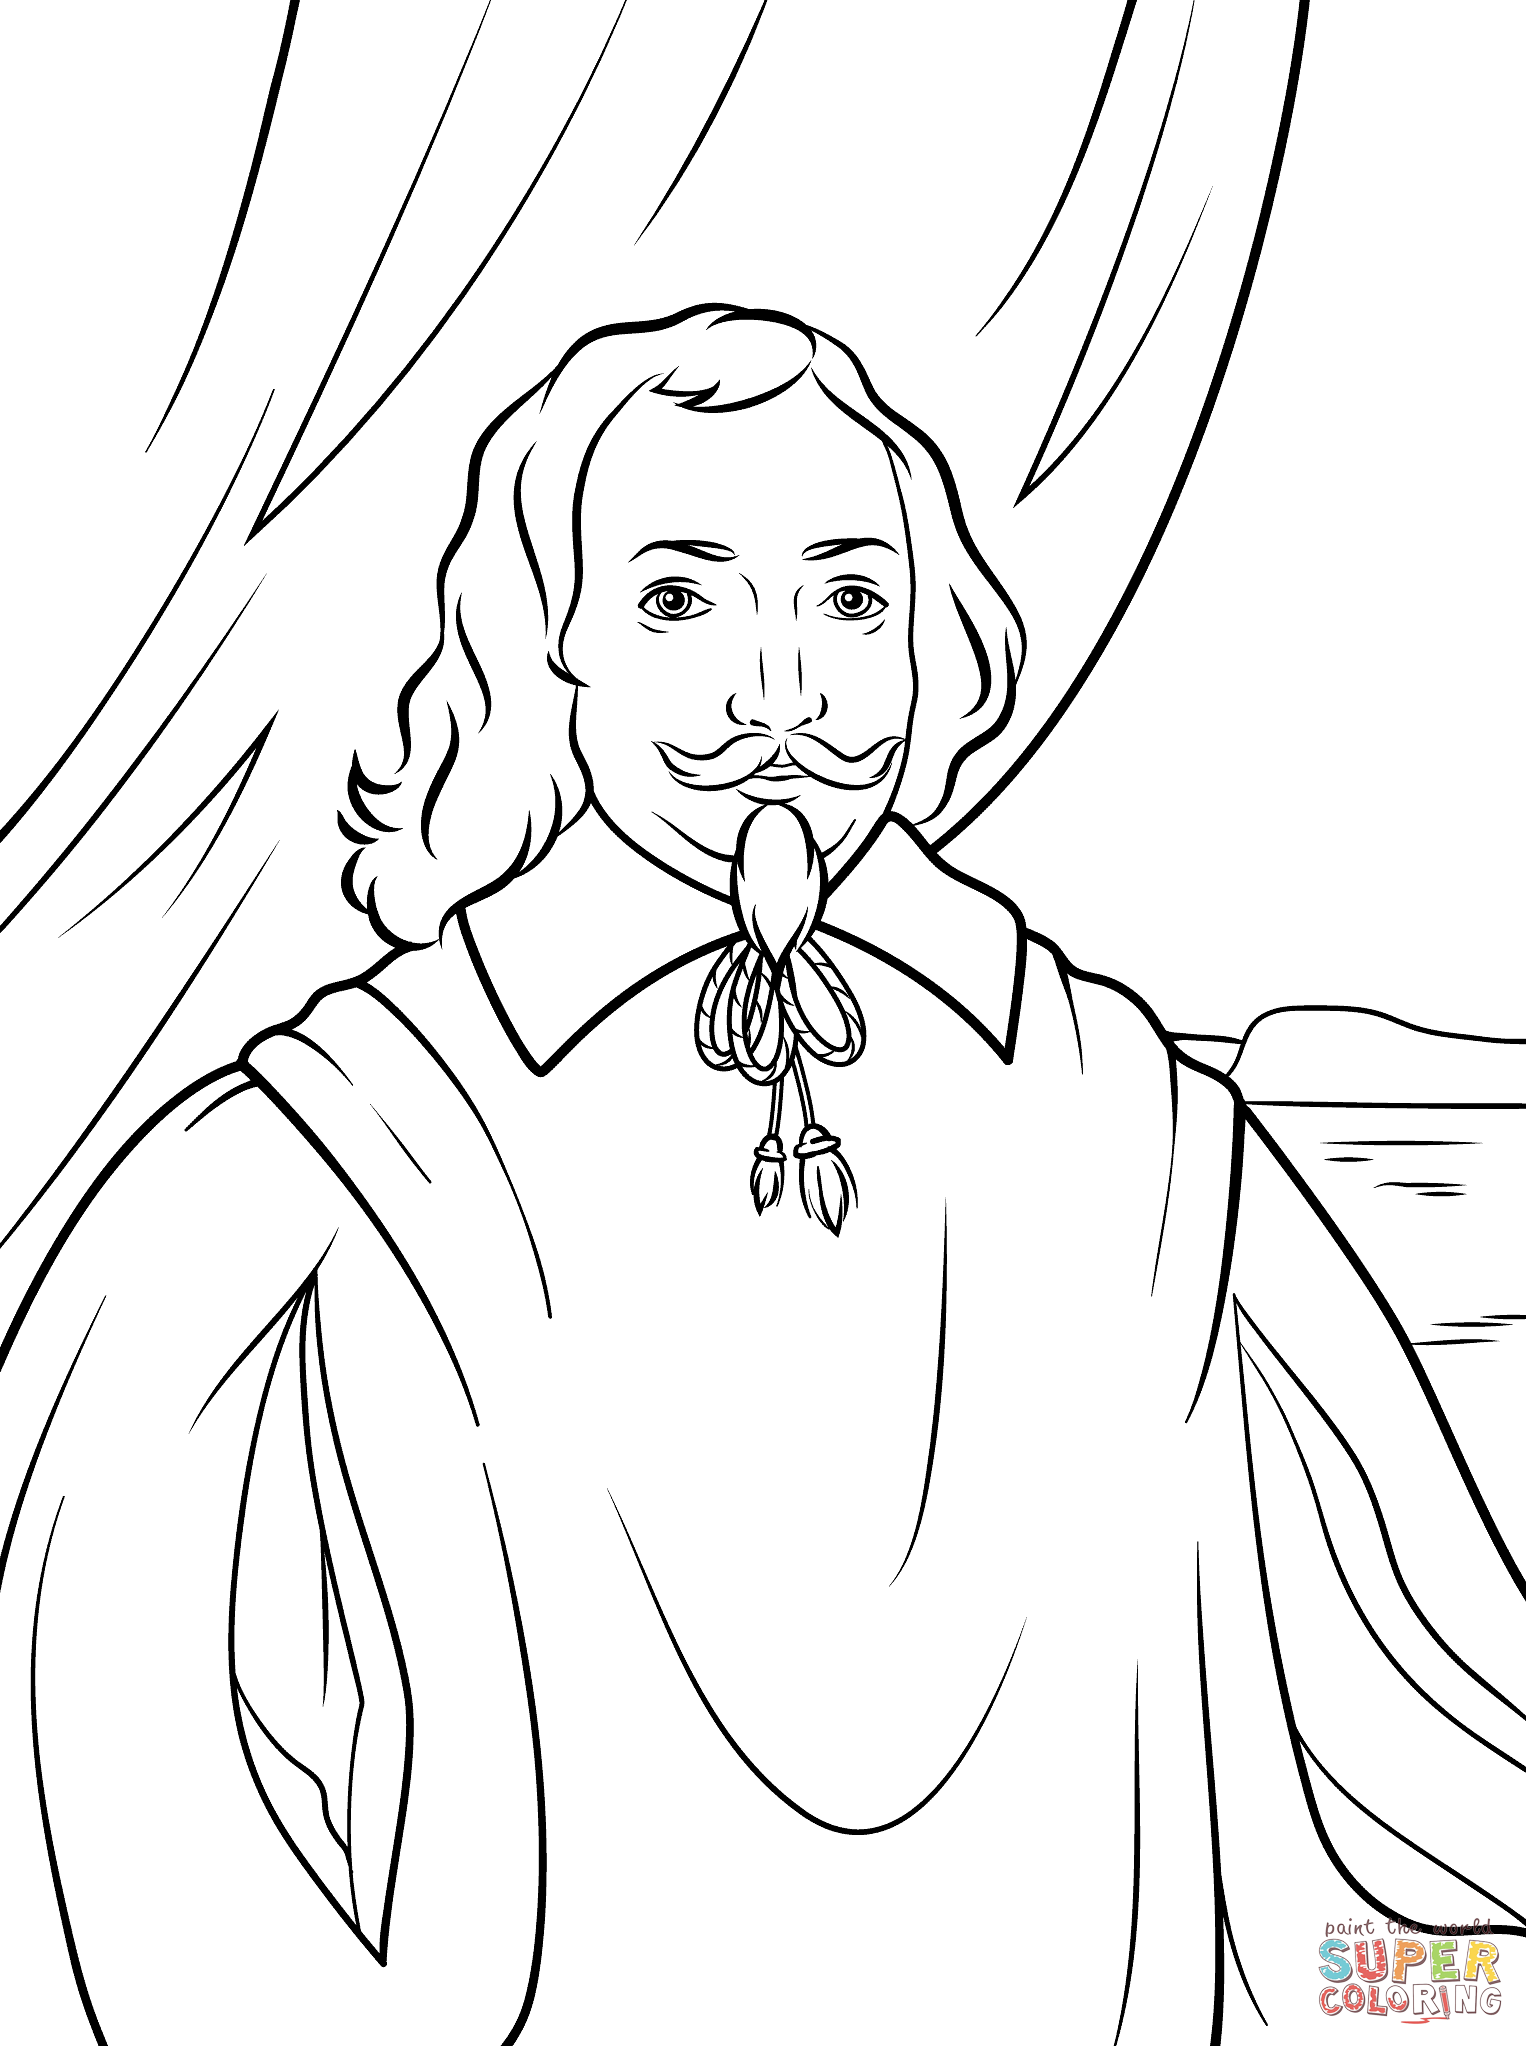 John Smith coloring page | Free Printable Coloring Pages